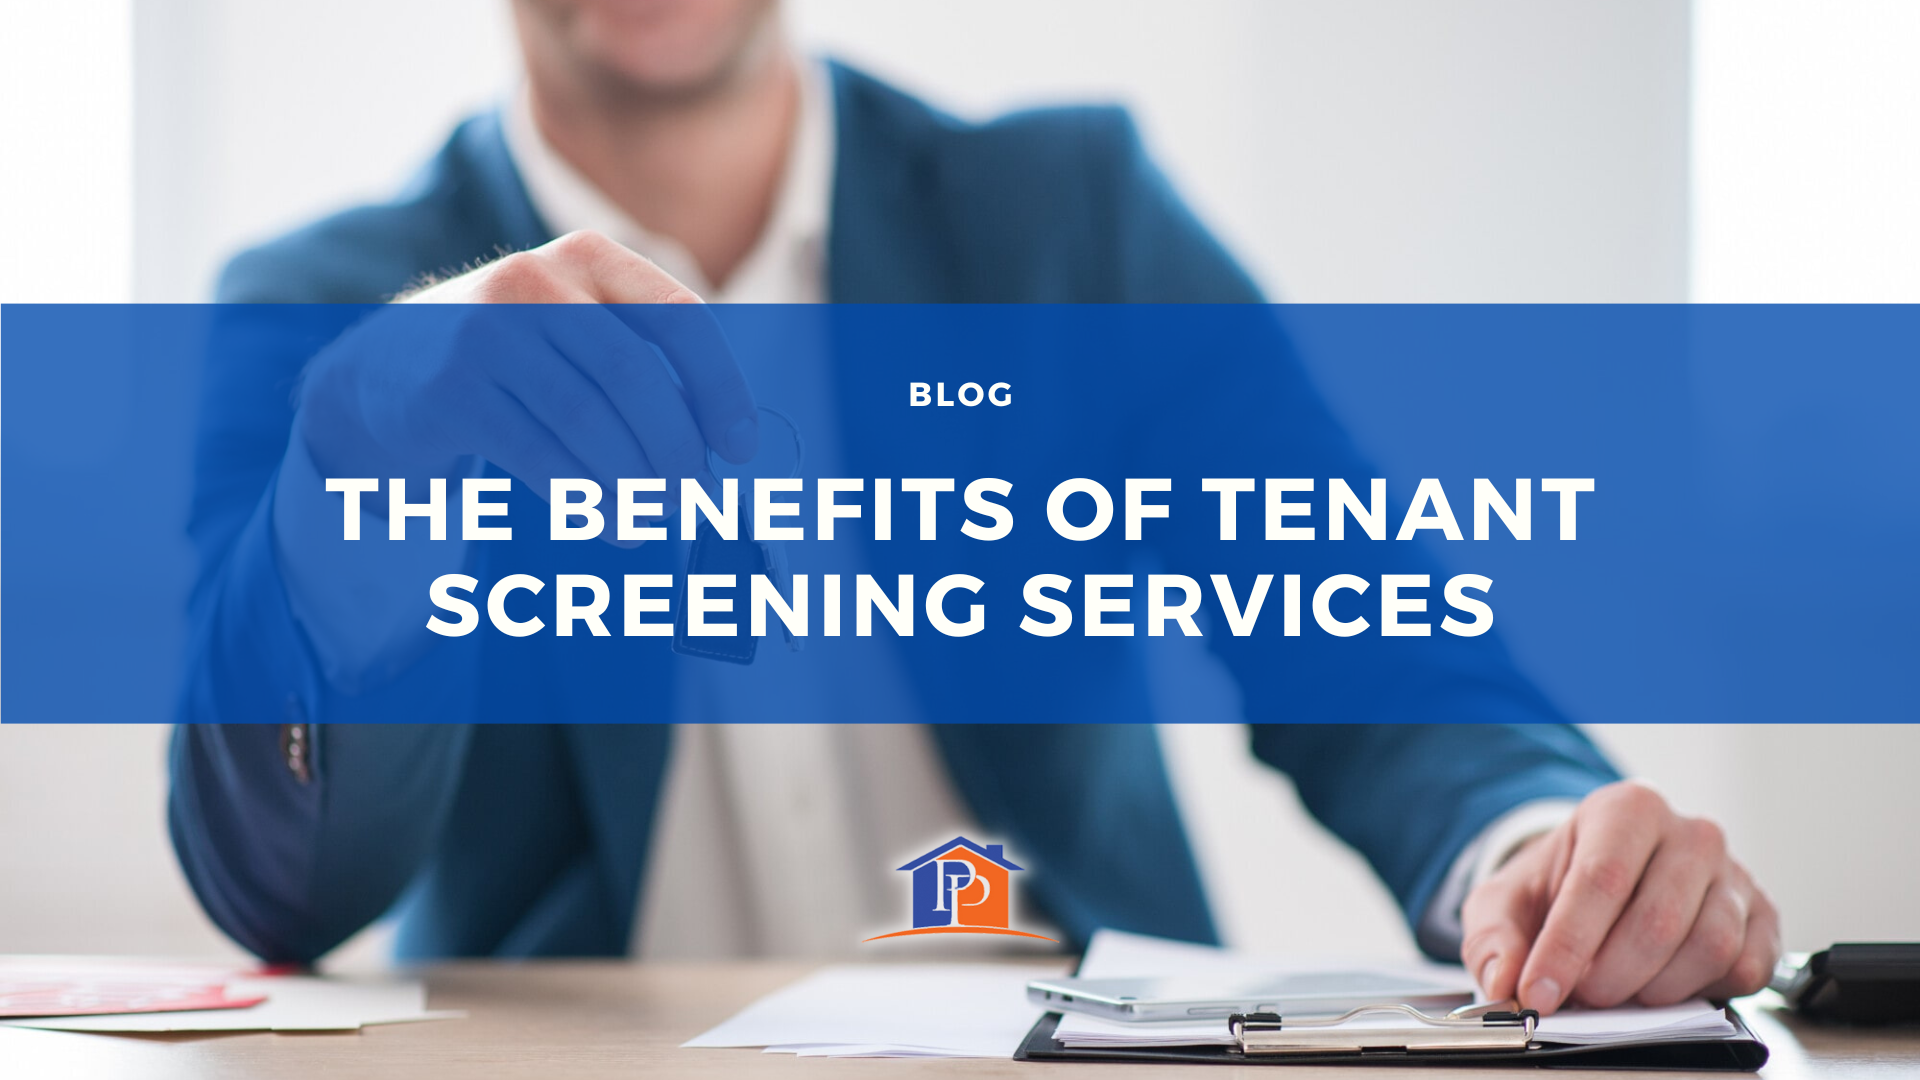 The Benefits of Tenant Screening Services